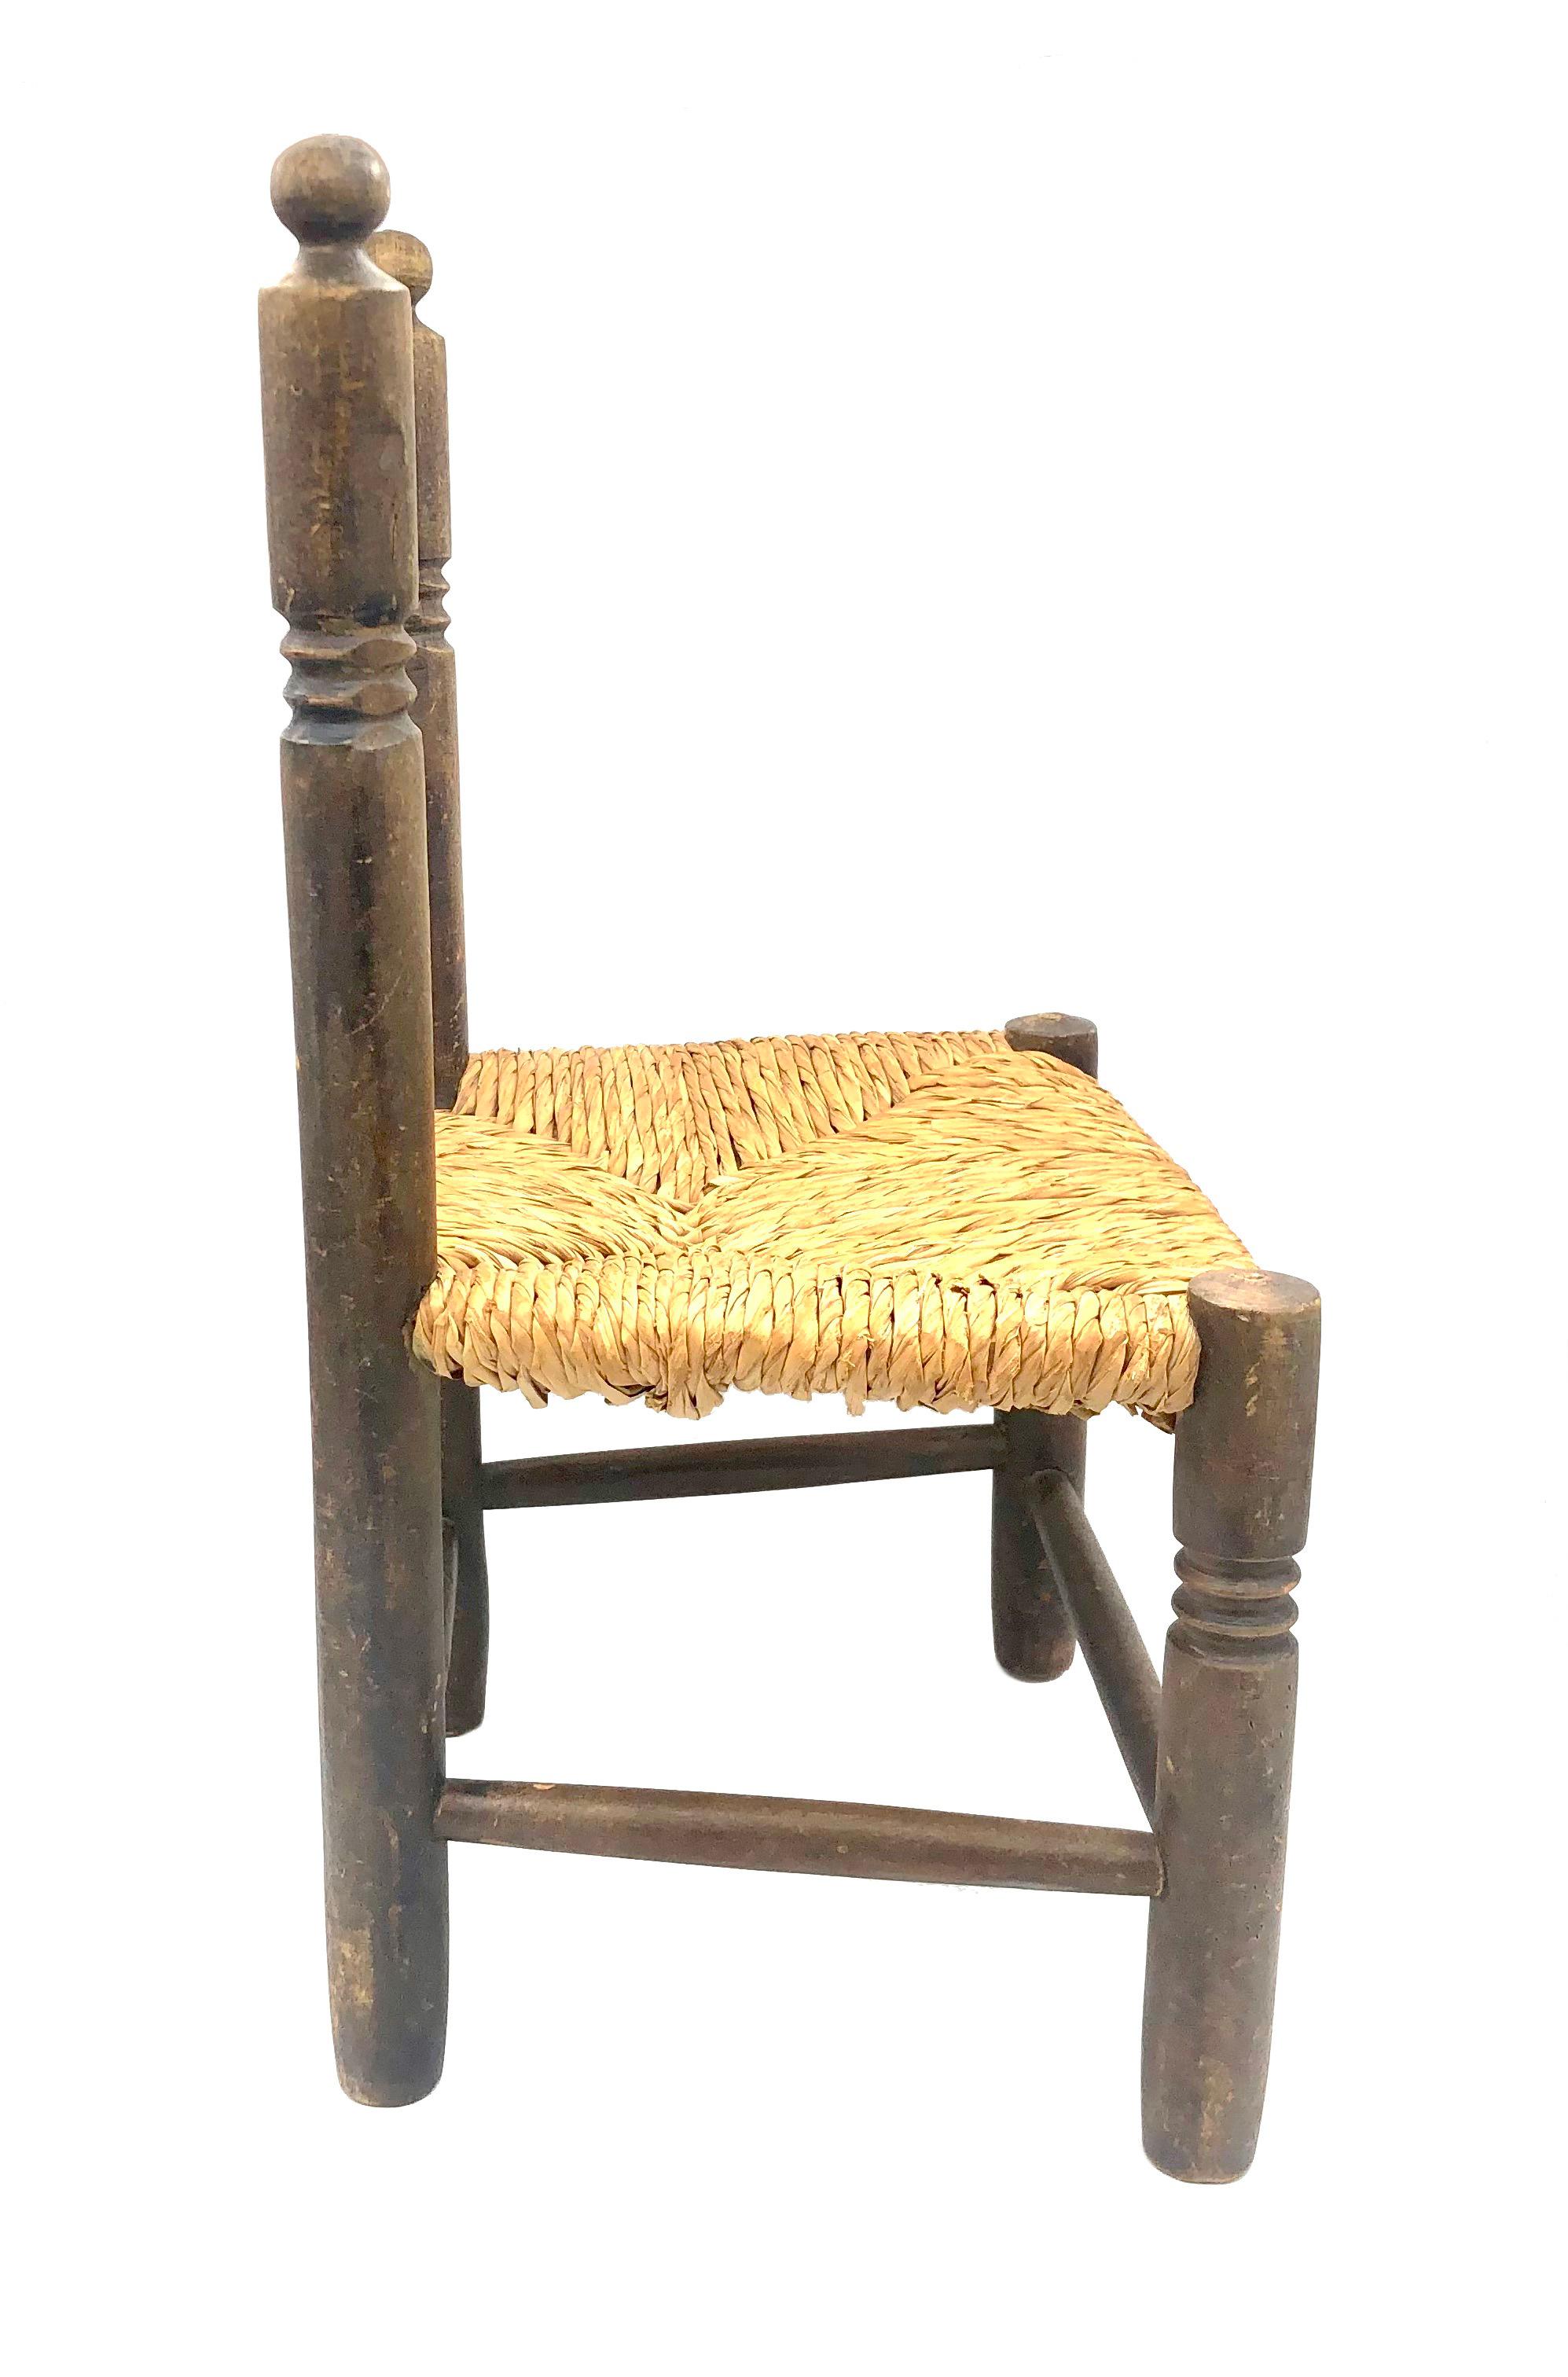 This solid childrens chair was made out of turned oak in te last quarter of the 19th century. The wicker seat follows a geometric pattern and is in good condition. The legs and the back of the cair are decorated with geometric 
cut out circles.  